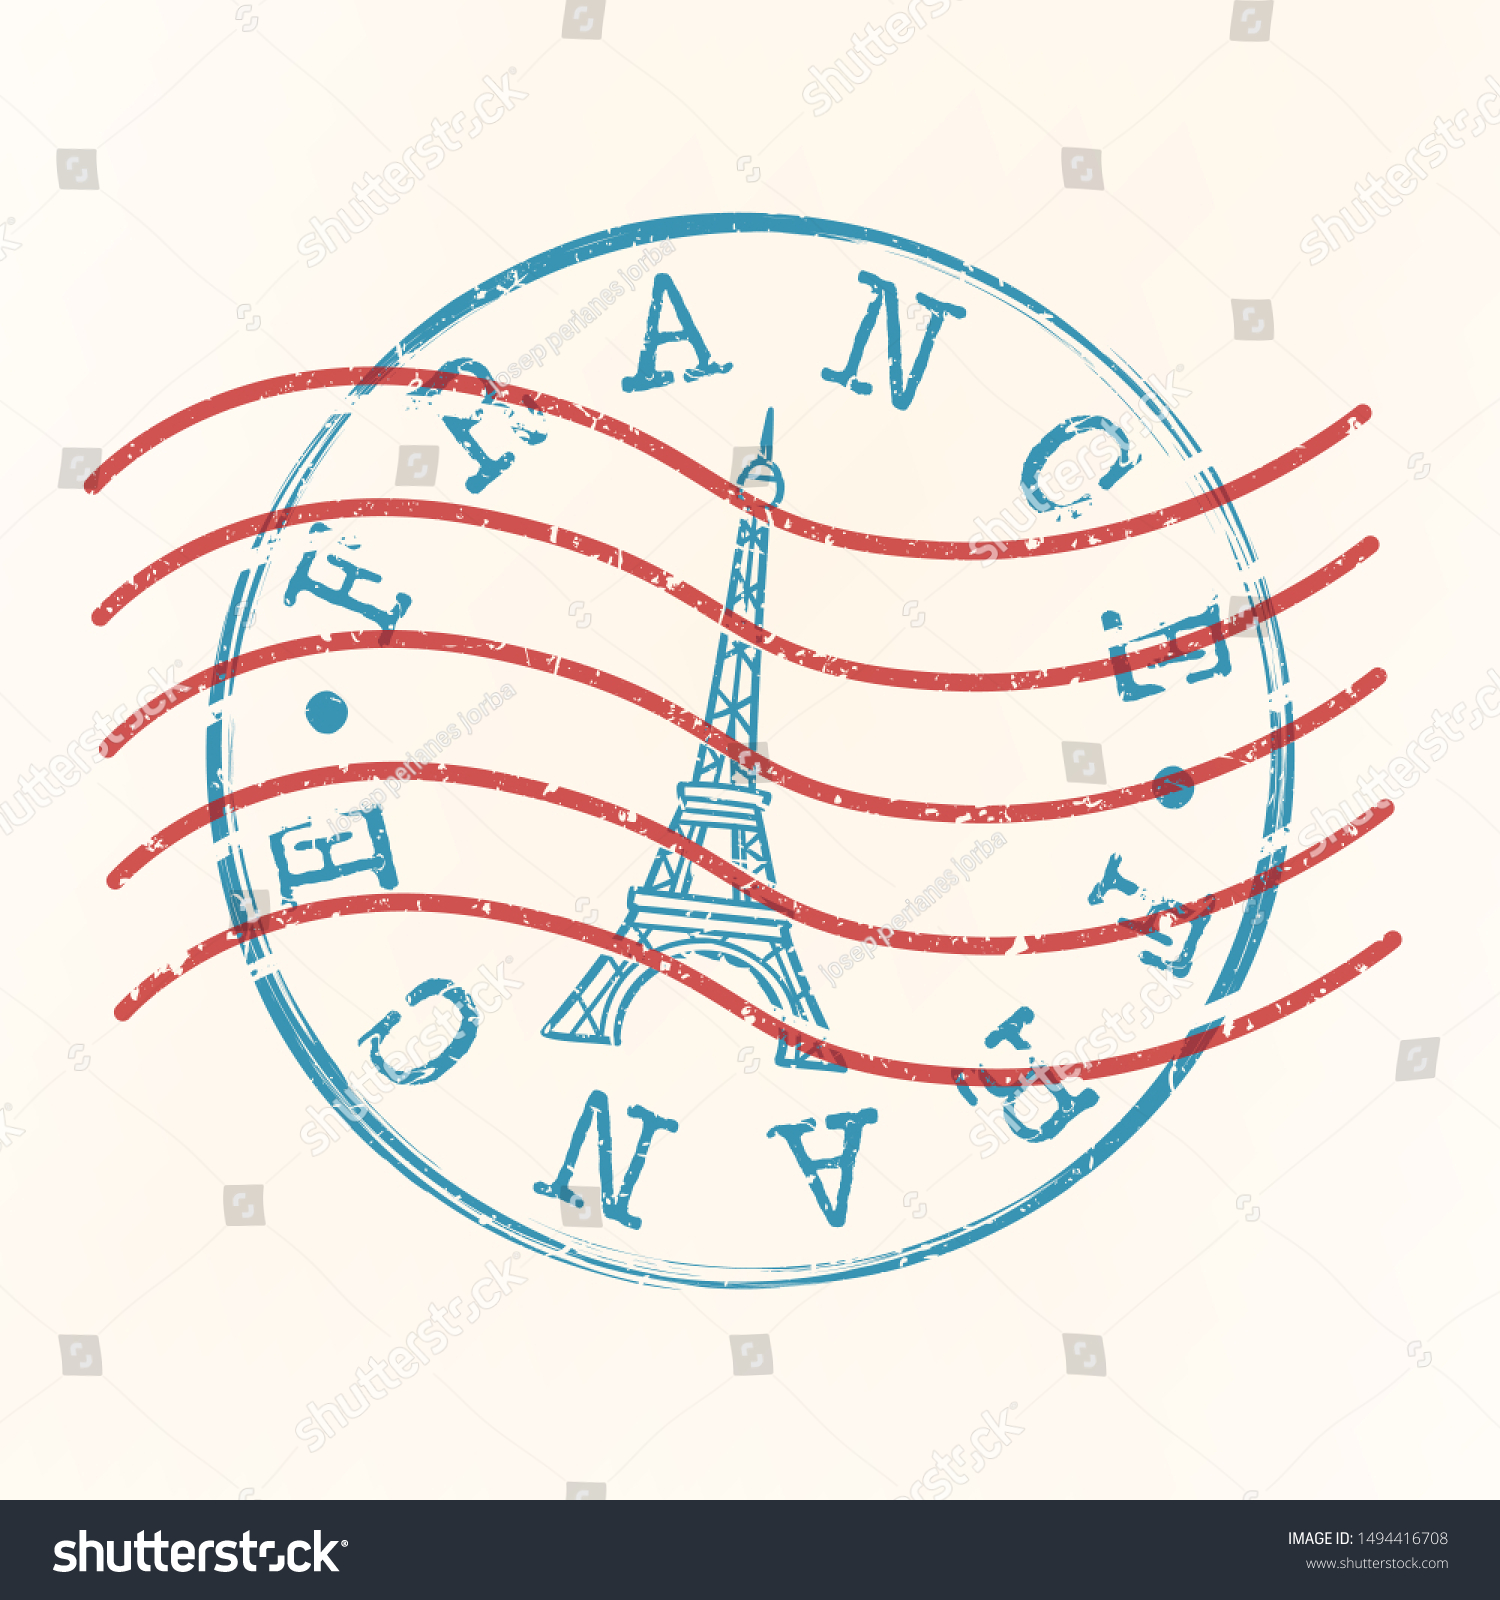 30,984 France lettering Images, Stock Photos & Vectors | Shutterstock